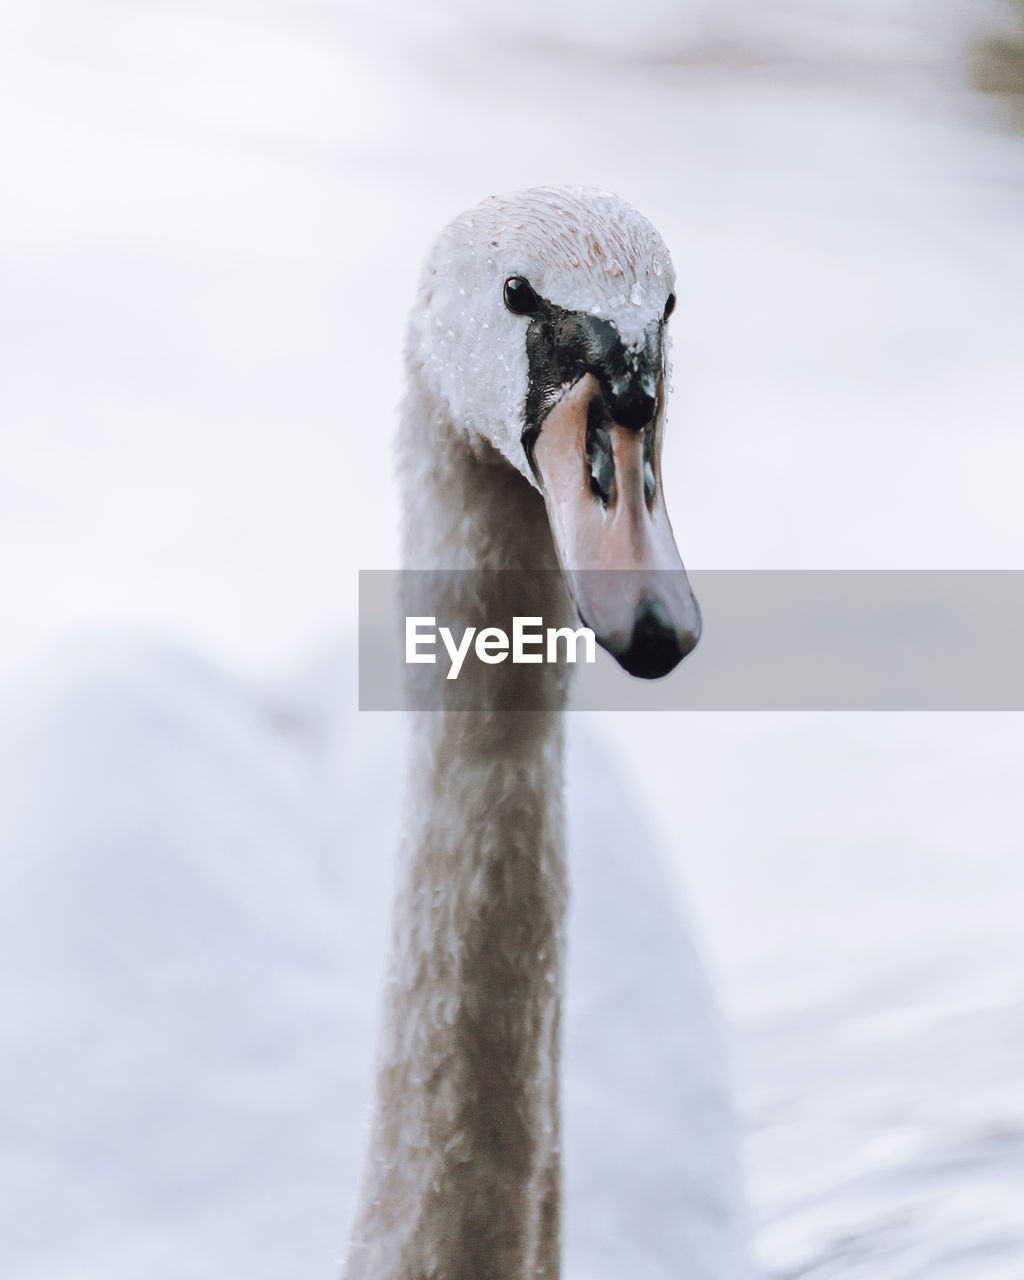 animal themes, animal, wildlife, animal wildlife, one animal, bird, swan, close-up, animal body part, nature, ducks, geese and swans, water bird, water, no people, focus on foreground, winter, portrait, day, animal head, beak, white, outdoors, cold temperature, snow